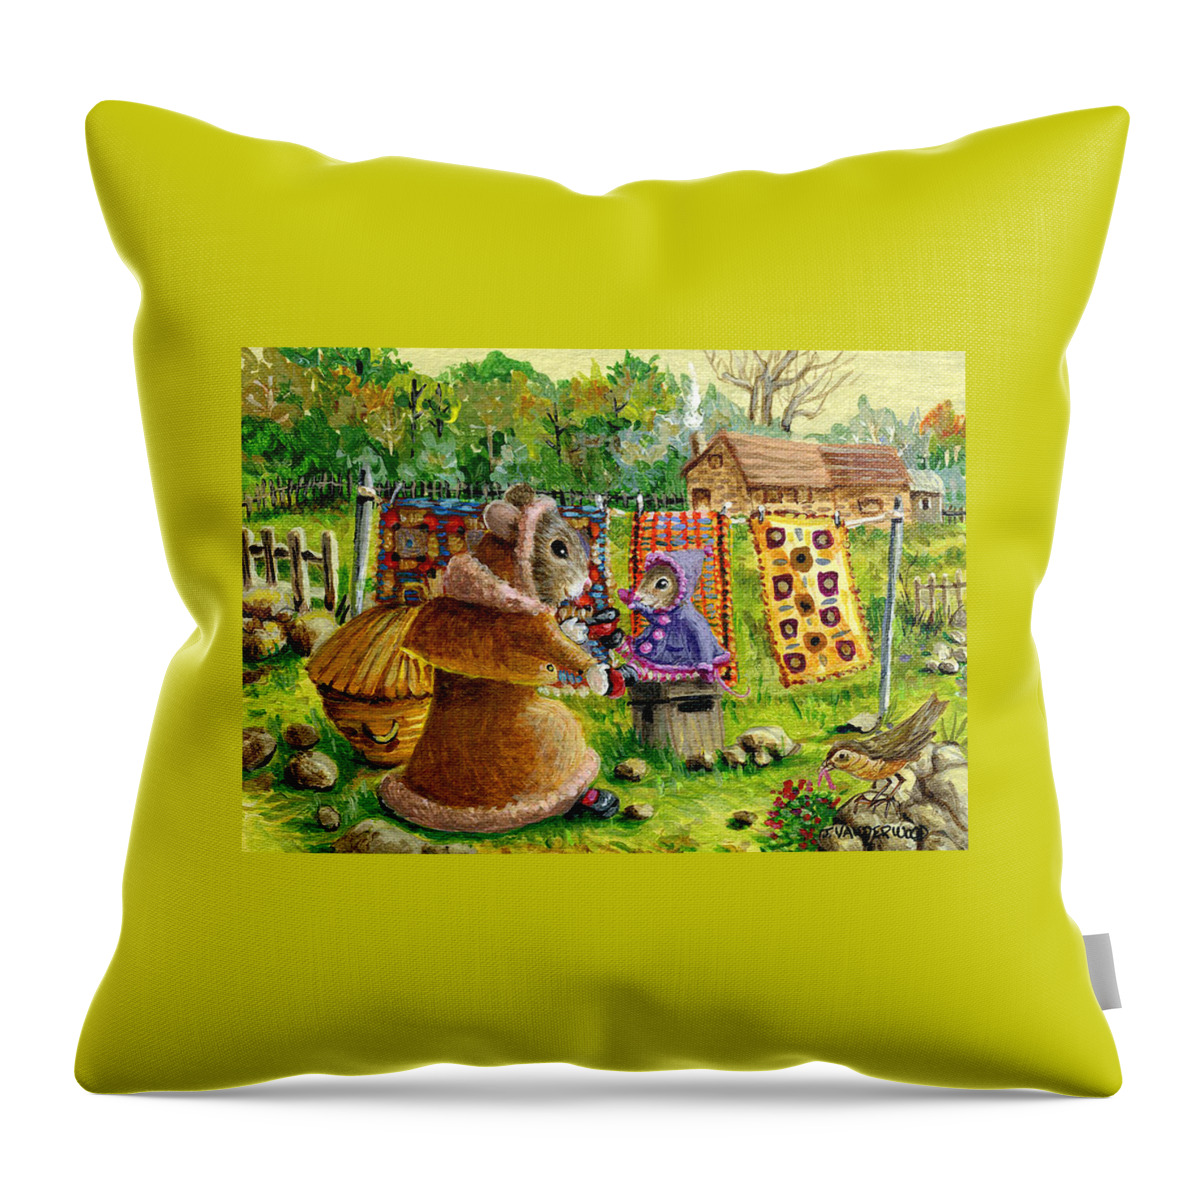 Mice Throw Pillow featuring the painting I Love You, Mommy by Jacquelin L Vanderwood Westerman